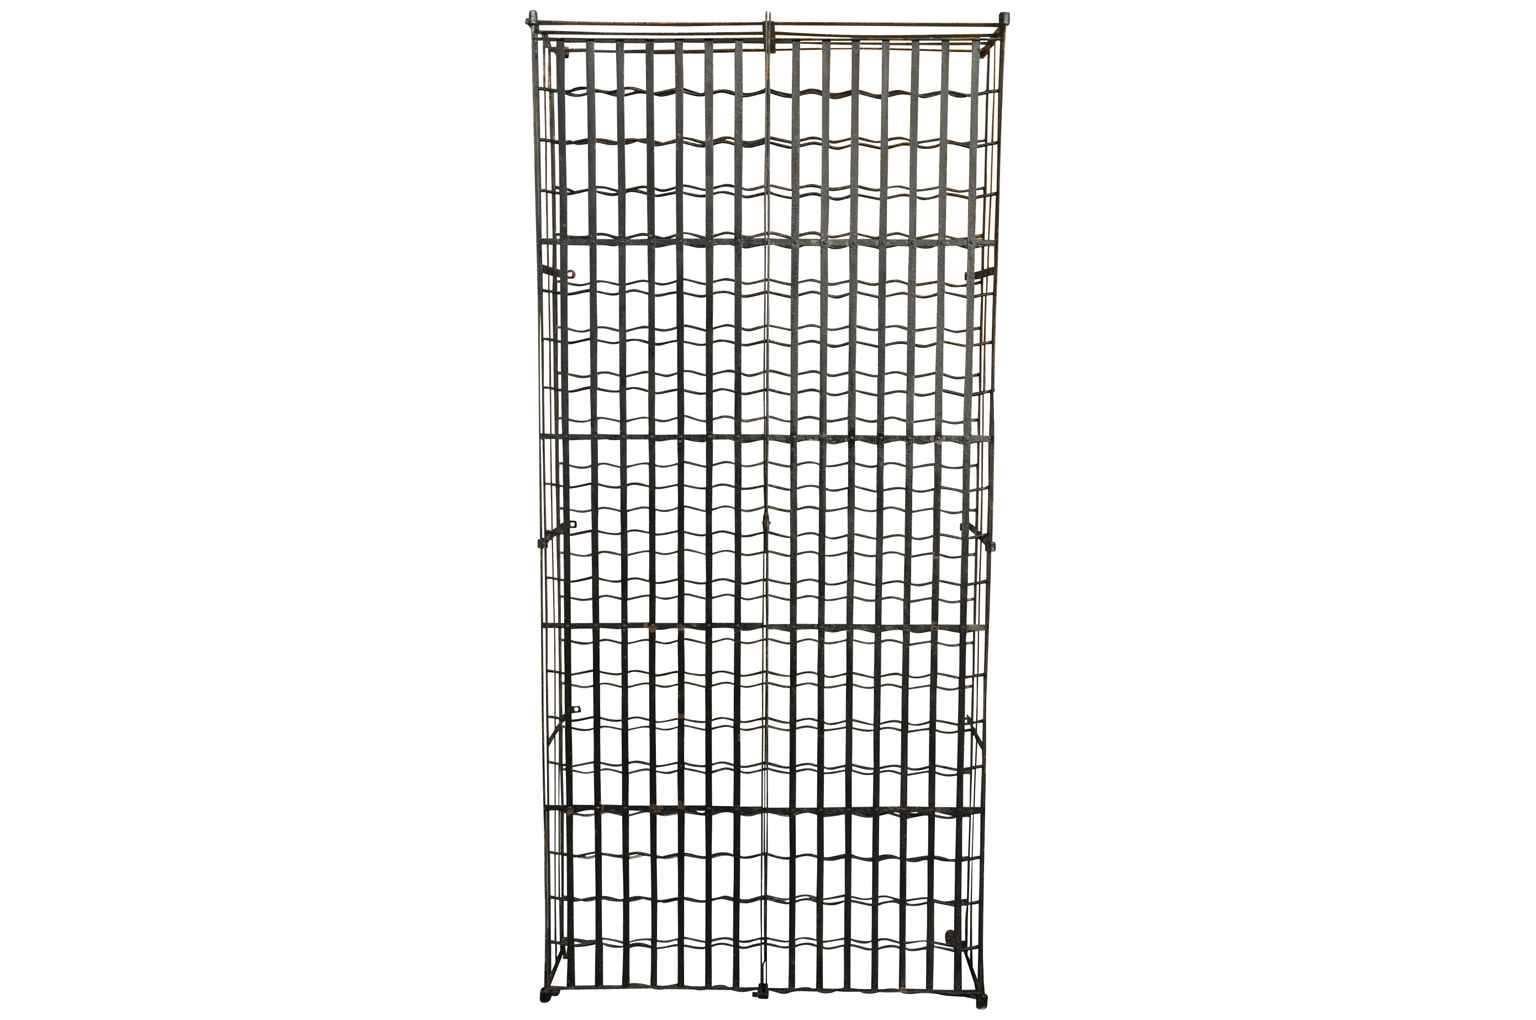 A very large wine cage constructed from painted iron. A wonderful piece for any kitchen, living area or wine cellar. Once full of wine bottles and nicely lit, the cage transforms into fantastic art piece.